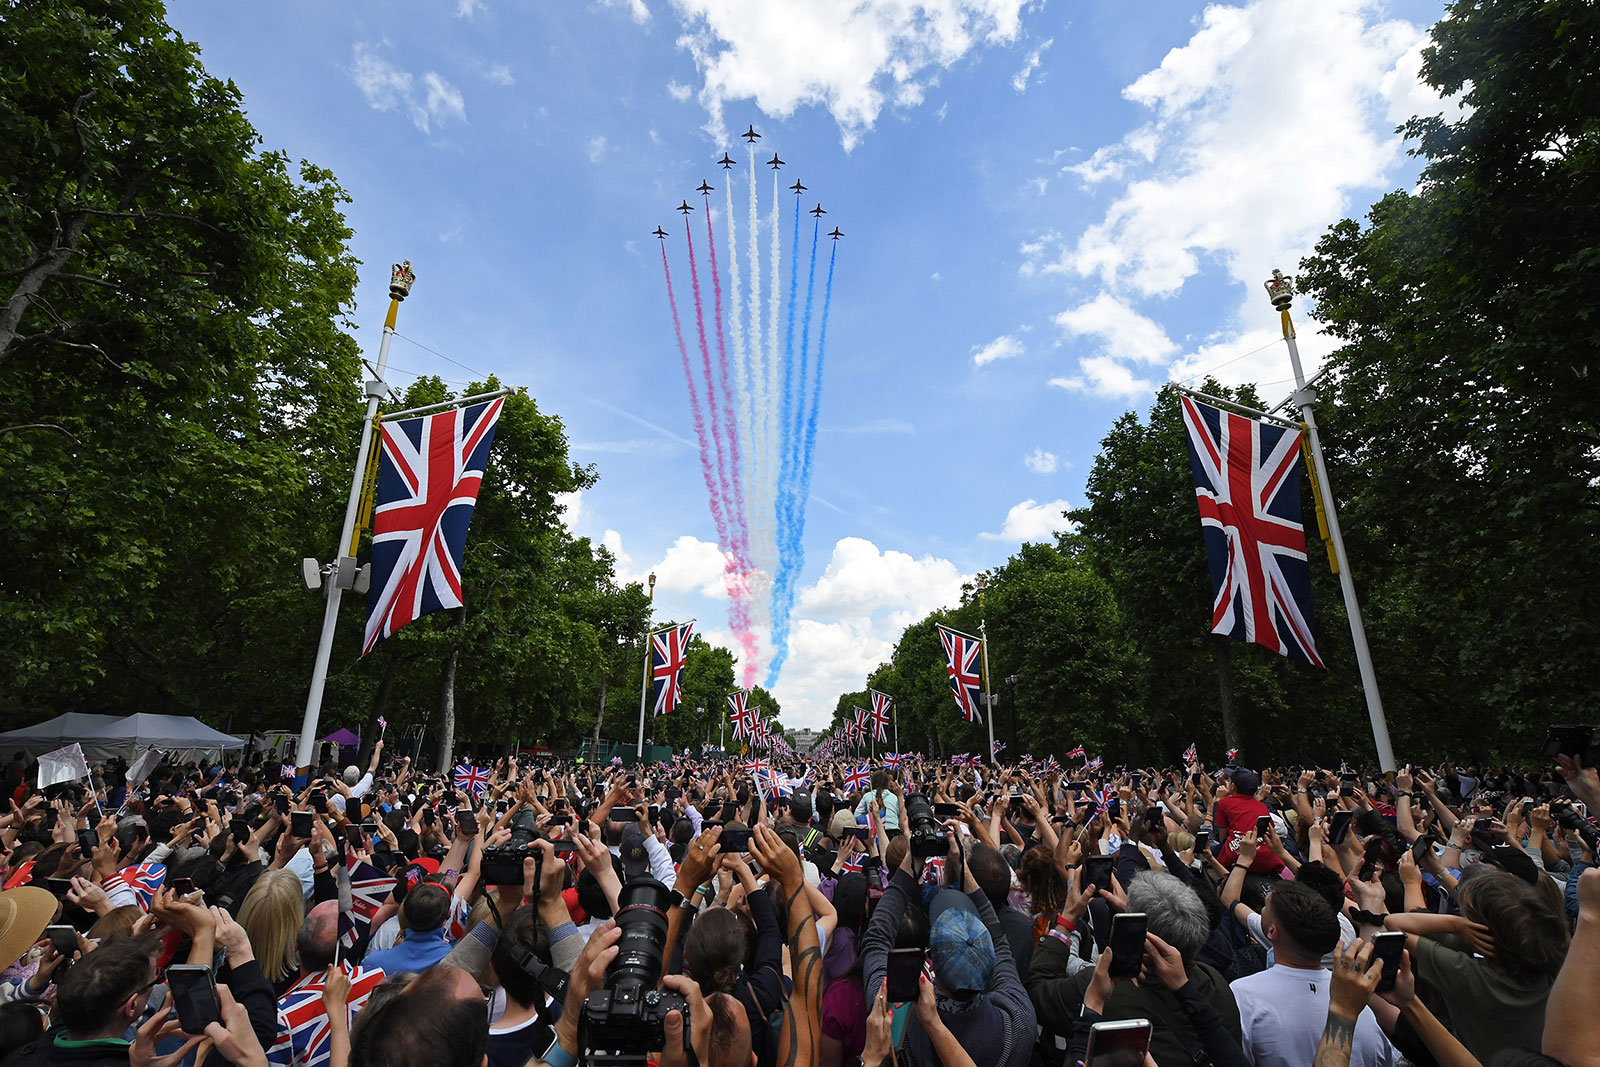 Spectators watch the RAF flypast on The Mall after the Trooping the Colour parade on June 2 in London.